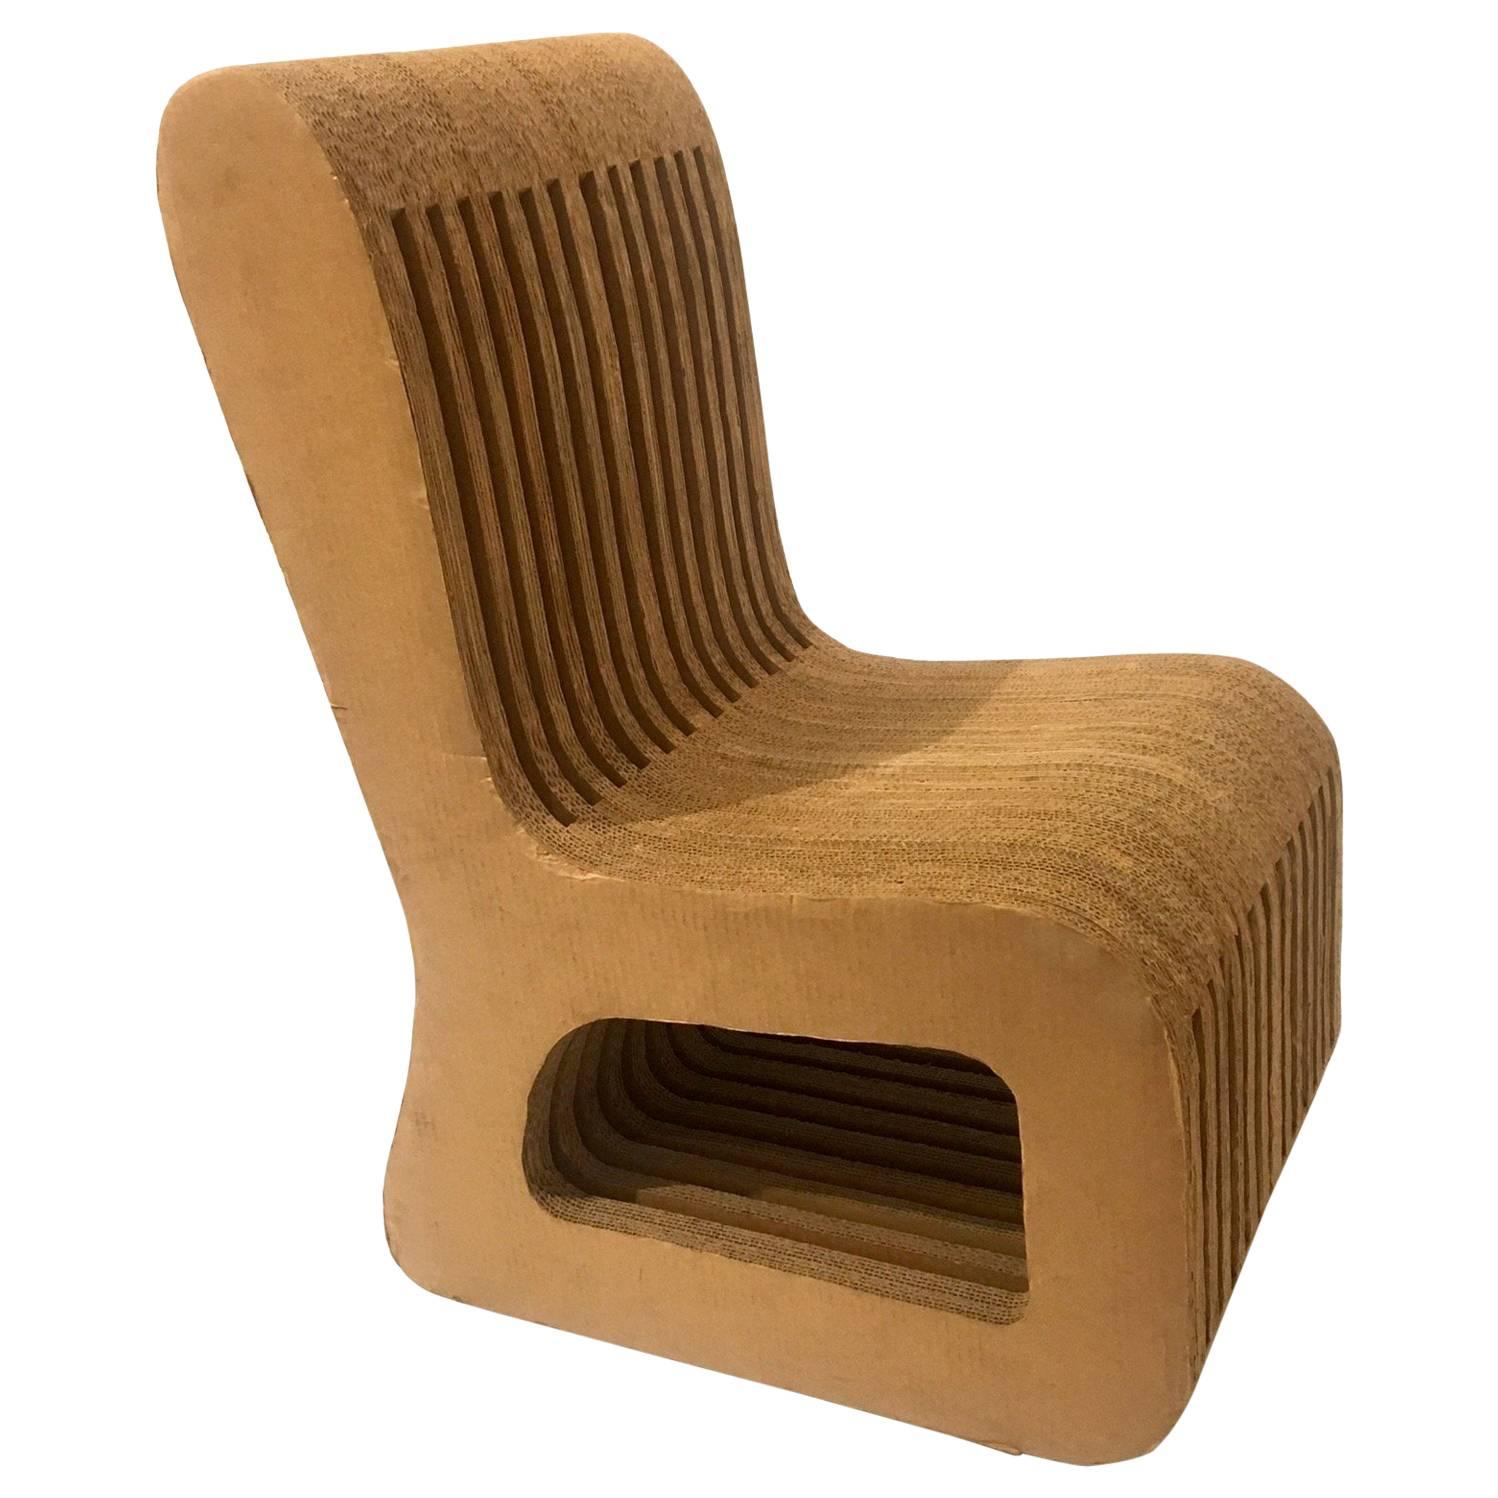 Rare and Unique Chair in Cardboard Attributed to Frank Ghery